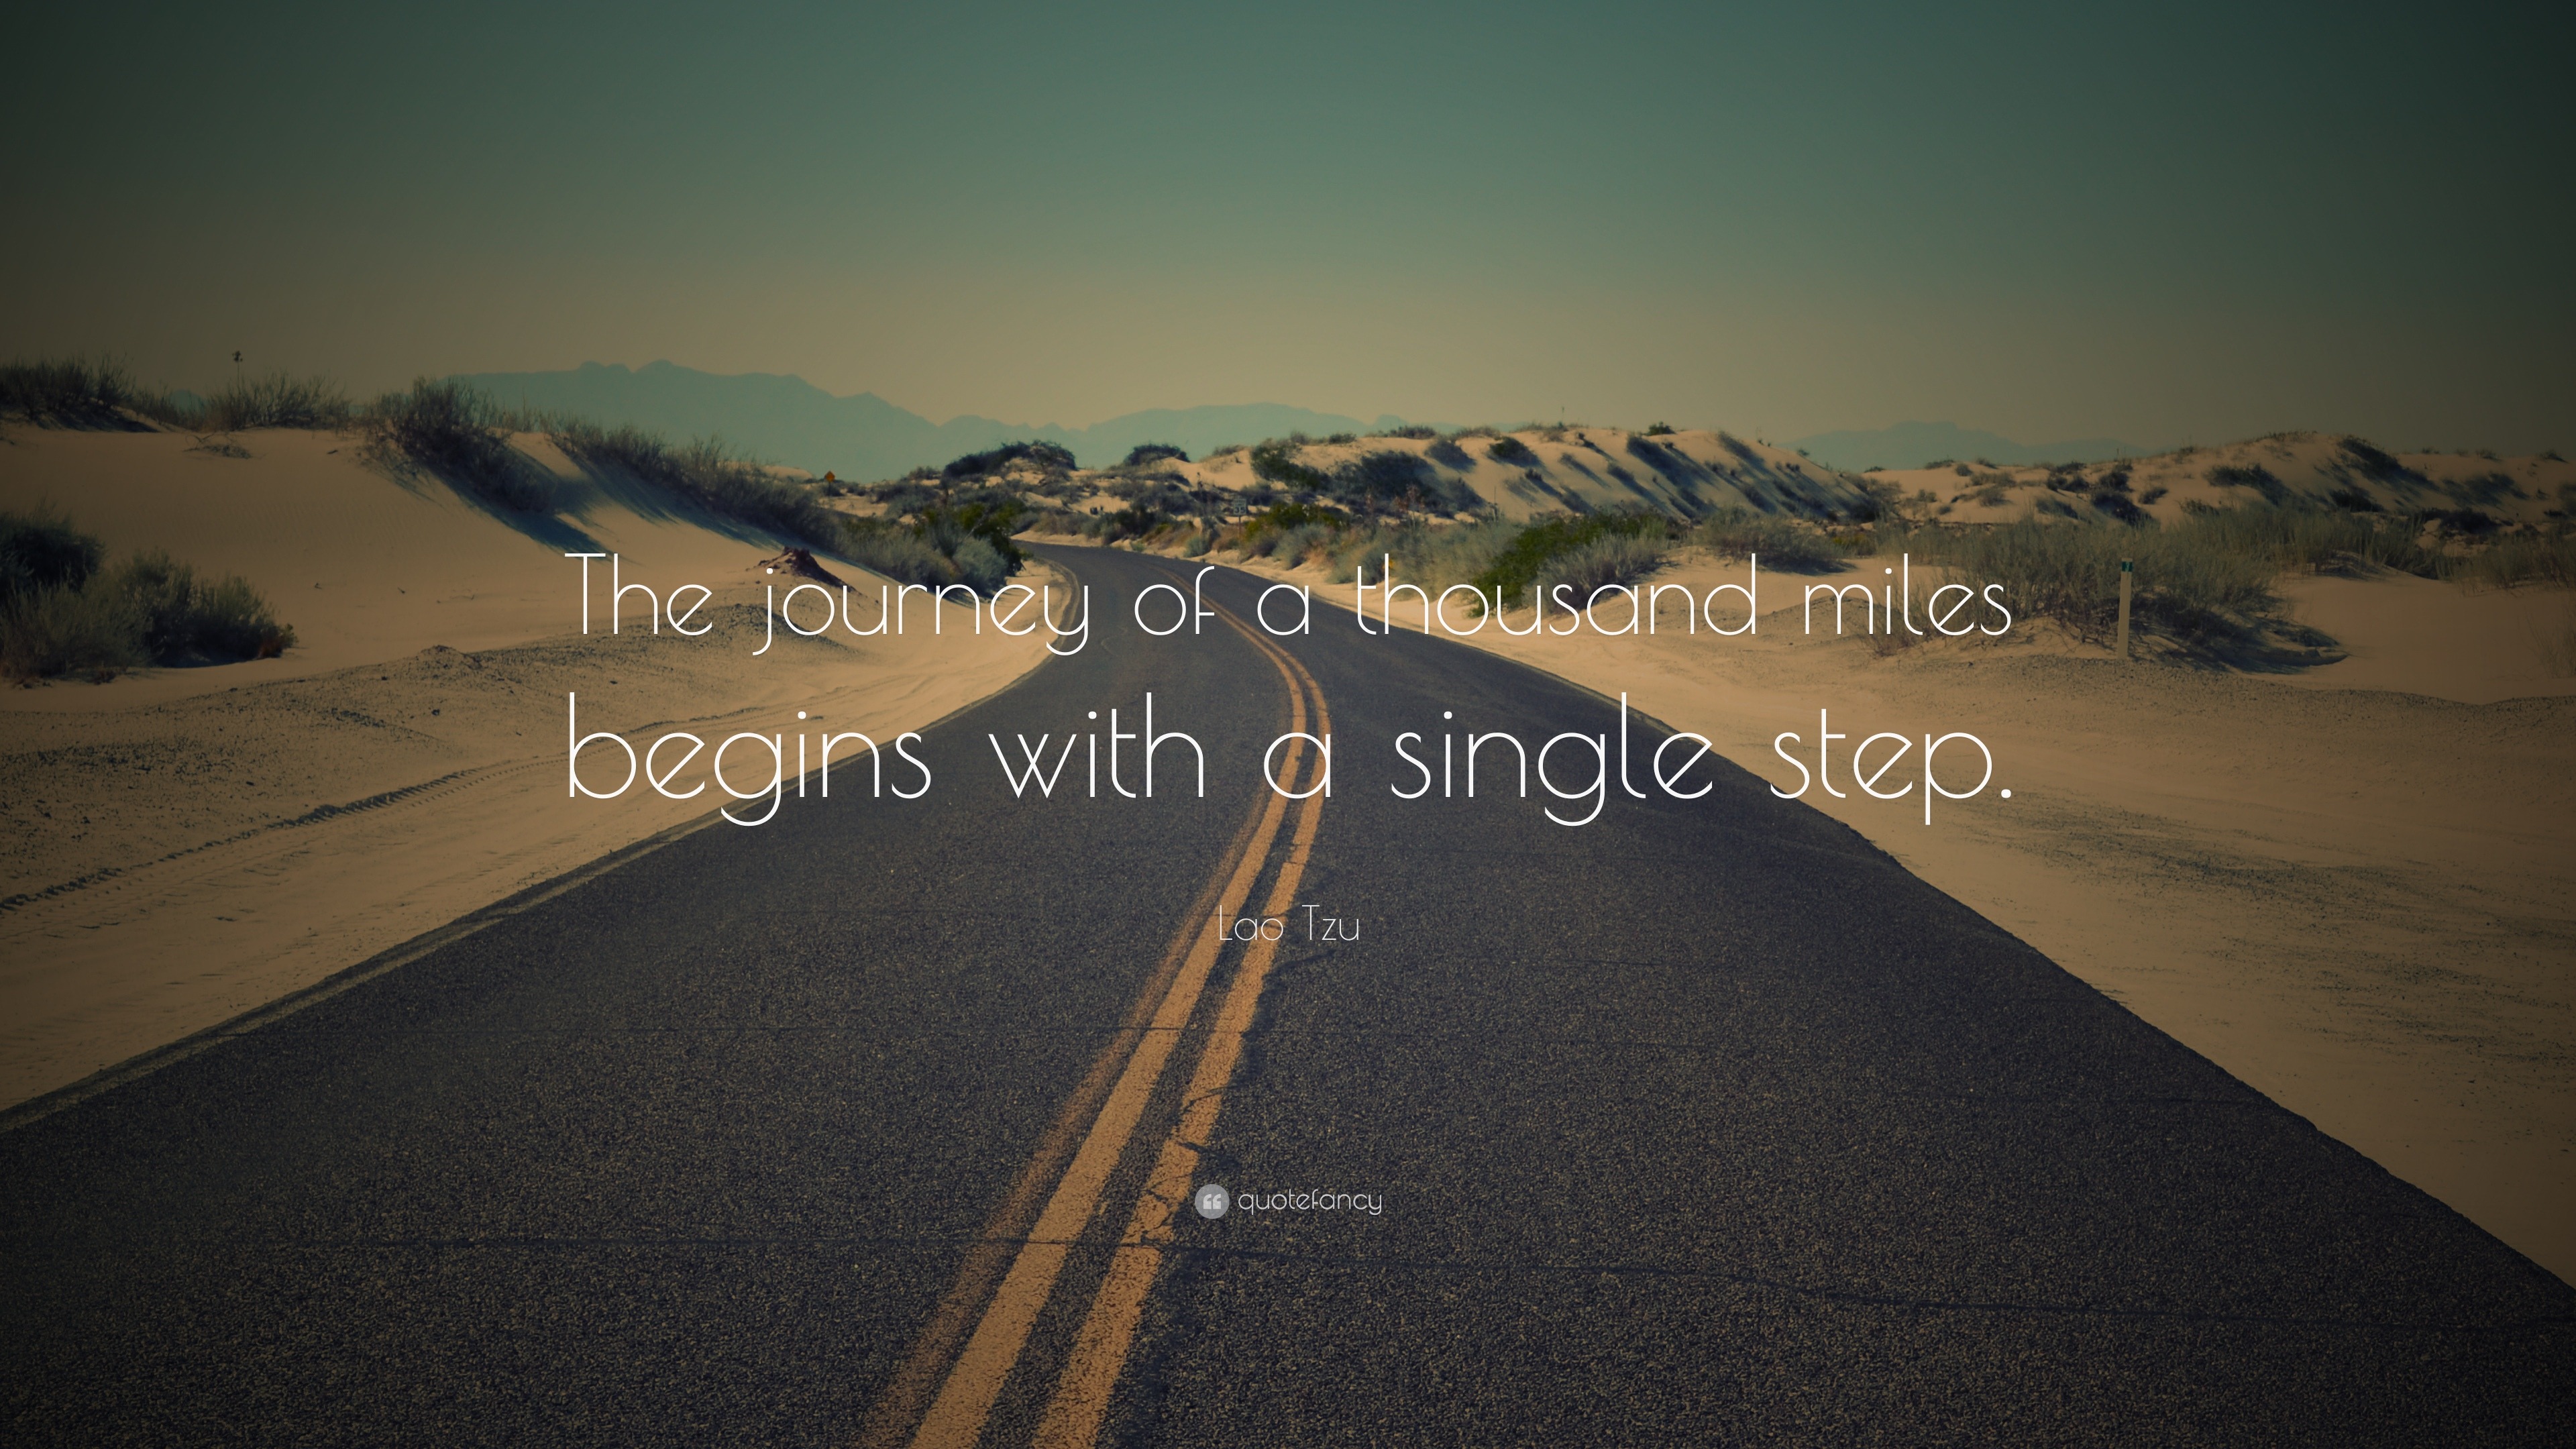 a great journey begins with a single step